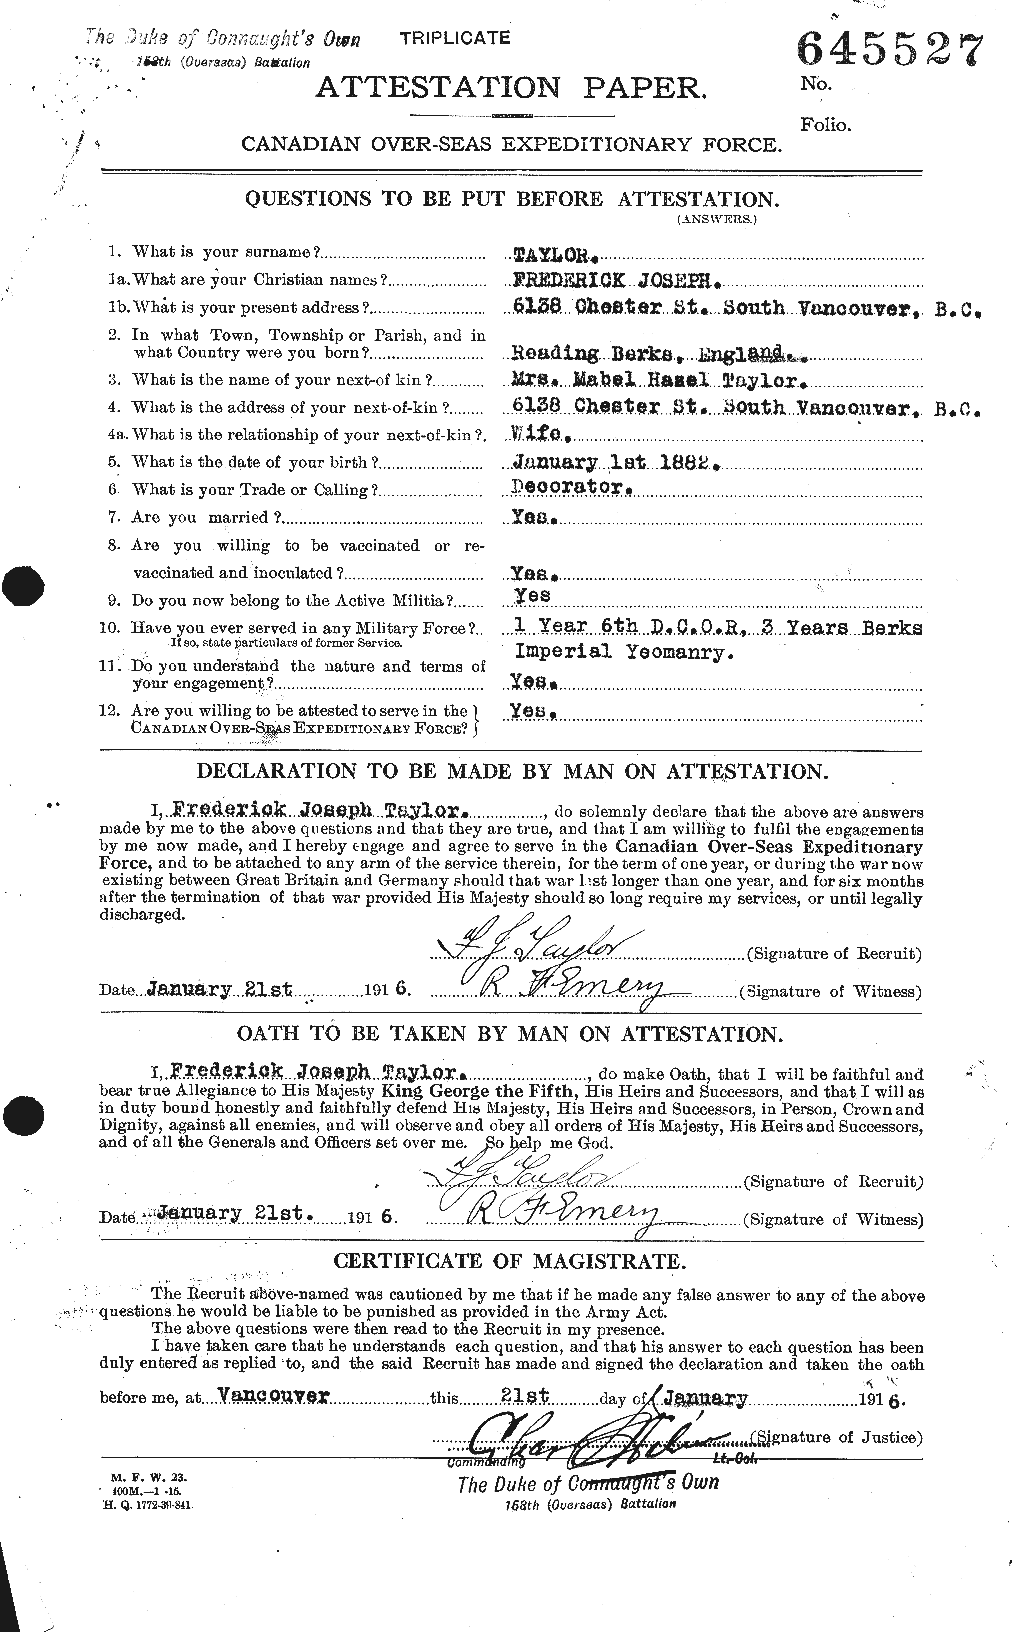 Personnel Records of the First World War - CEF 625810a